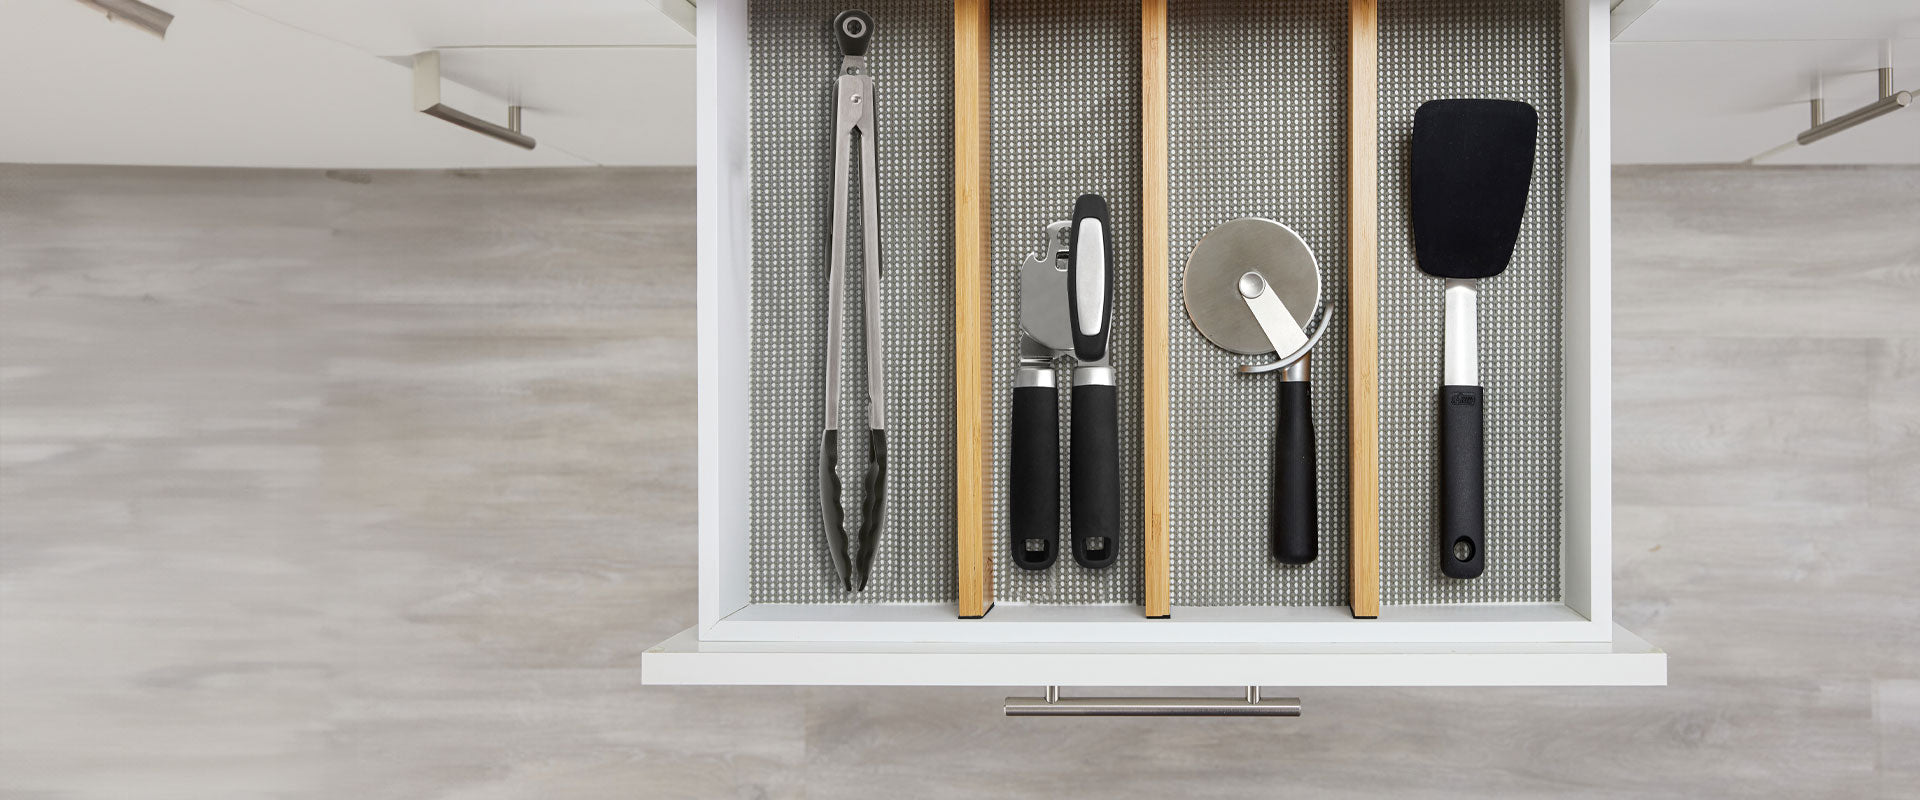 Gorilla Grip Kitchen utensils including the pizza cutter, spatula, tongs, and can opener shown in an open drawer